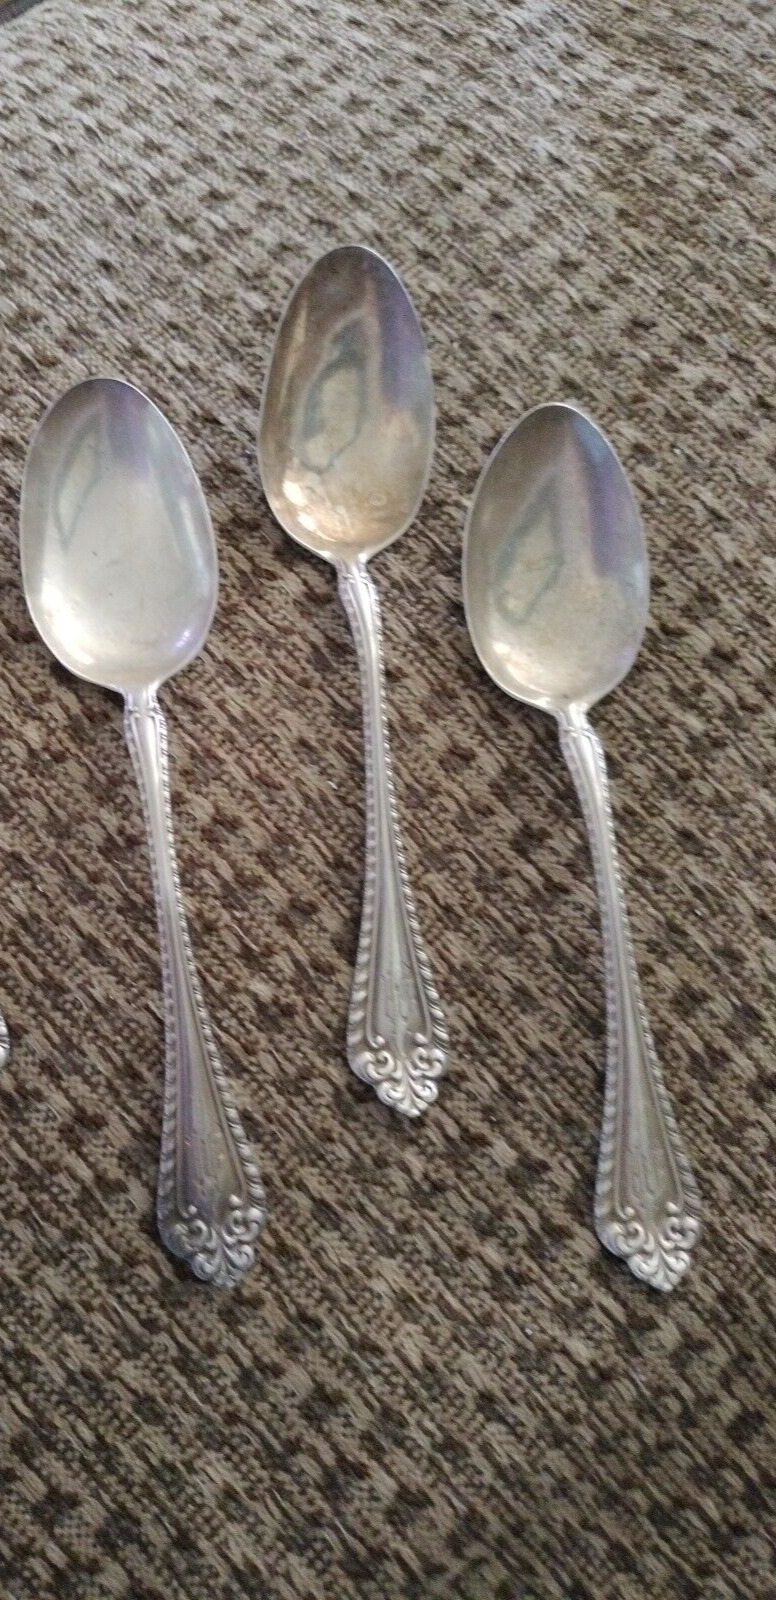 Melrose Alvin Sterling Silver Teaspoon 1910 3 Available